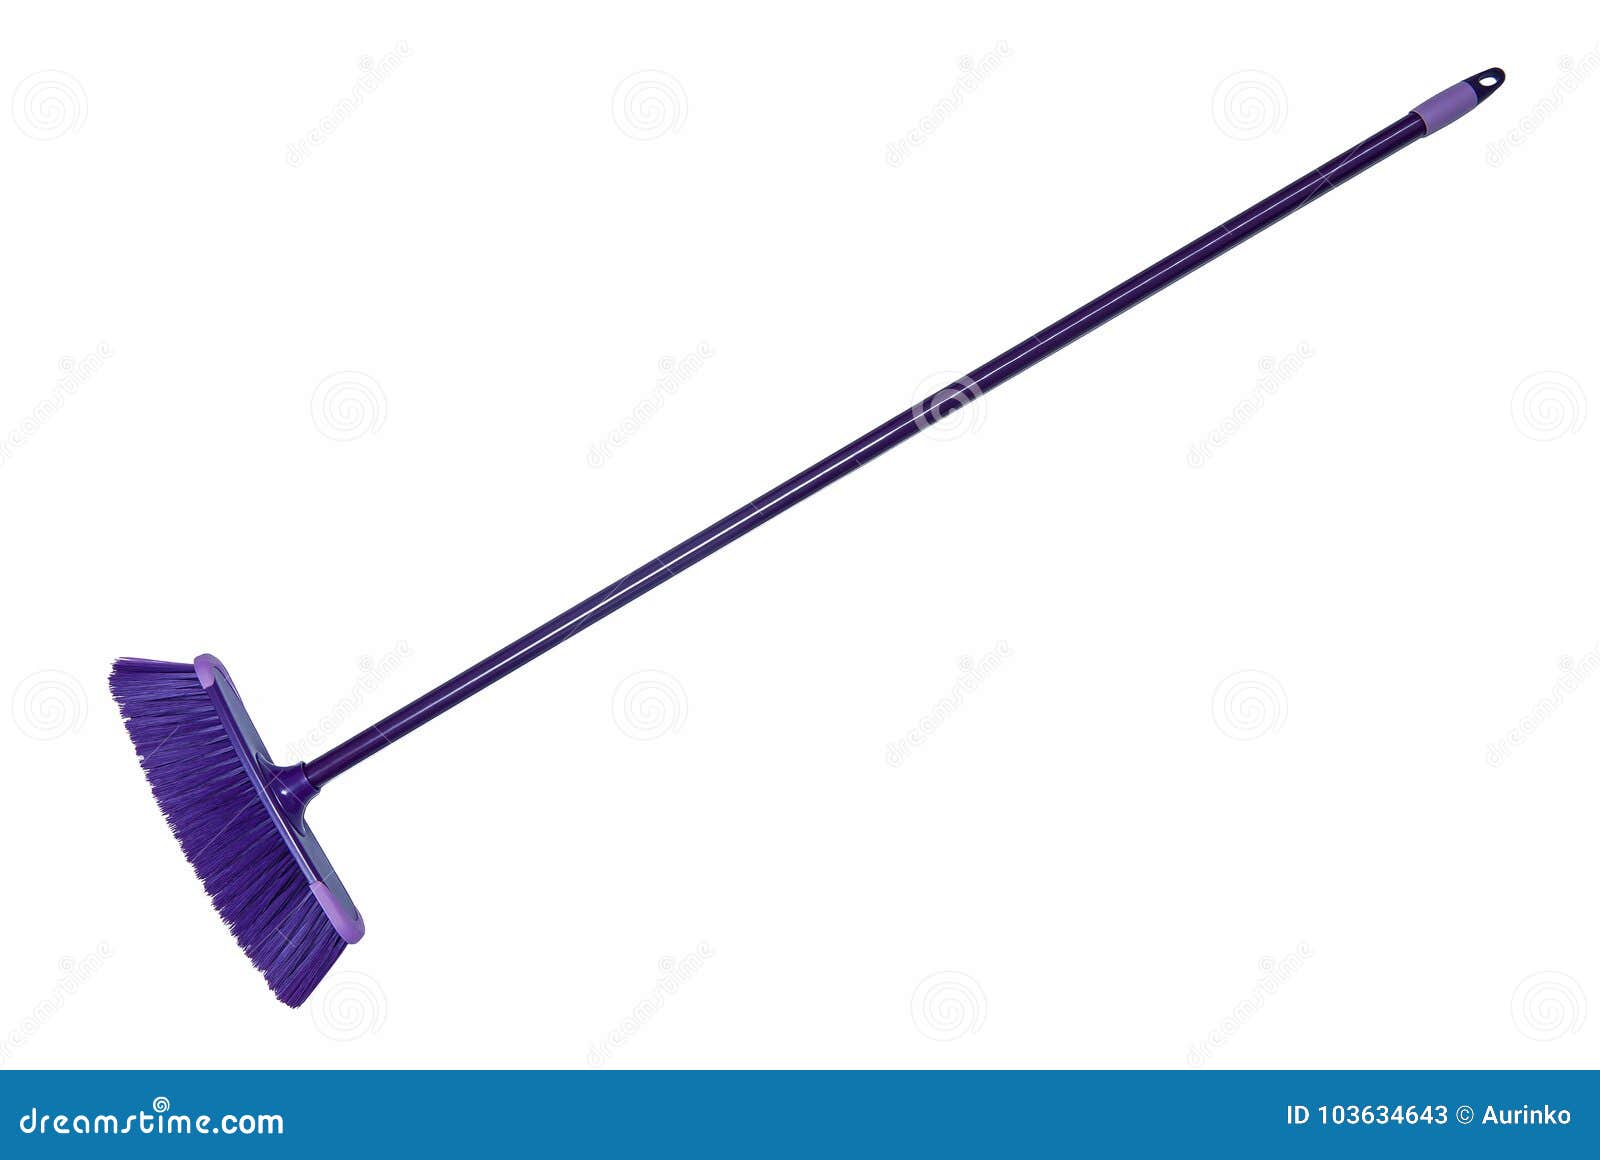 cleaning broom  on the white background